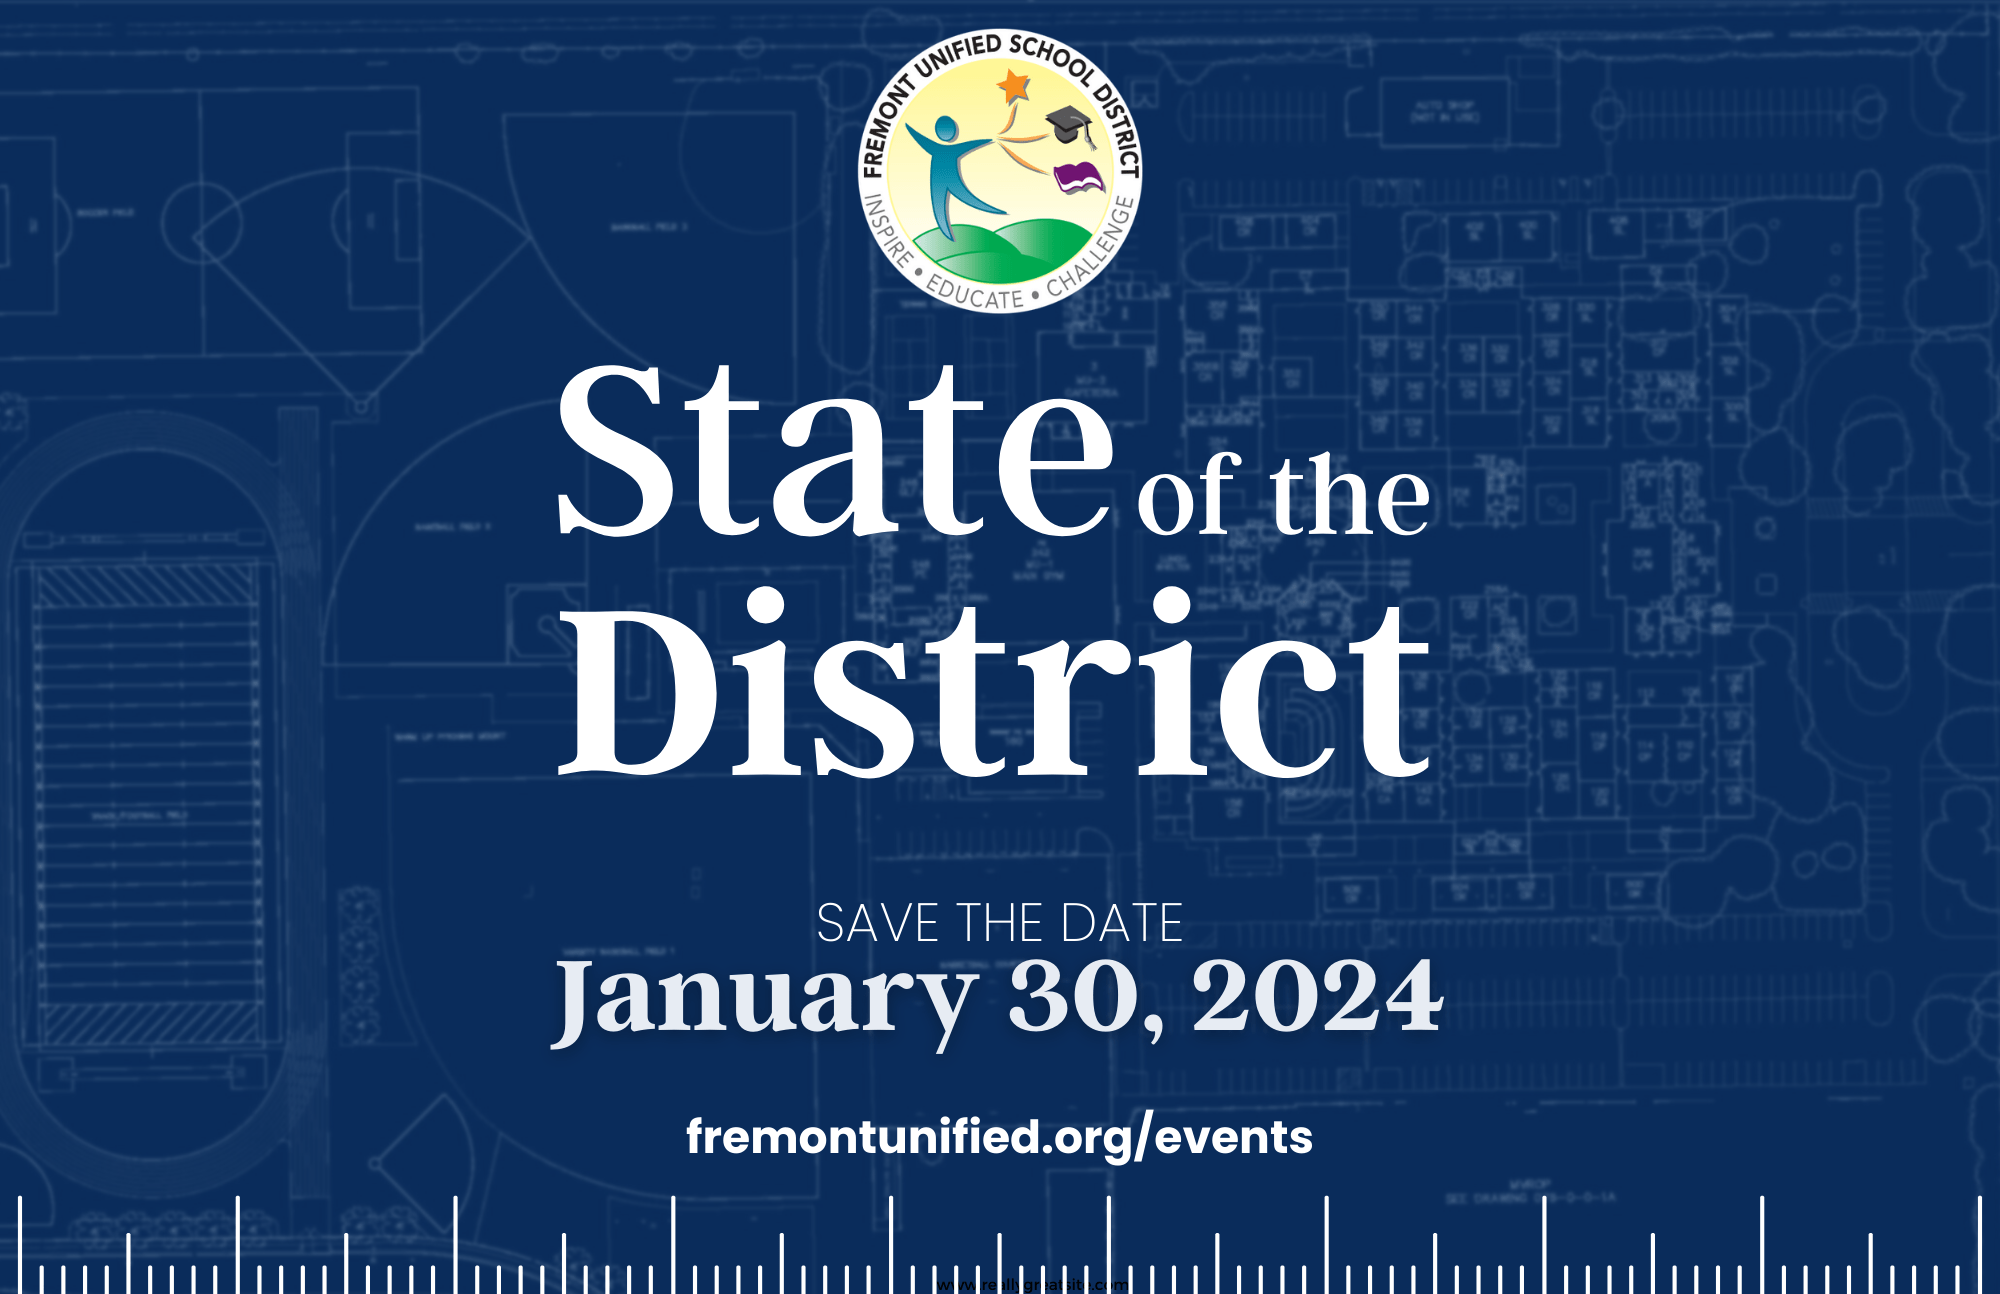 State of the District save the date for January 30, 2024